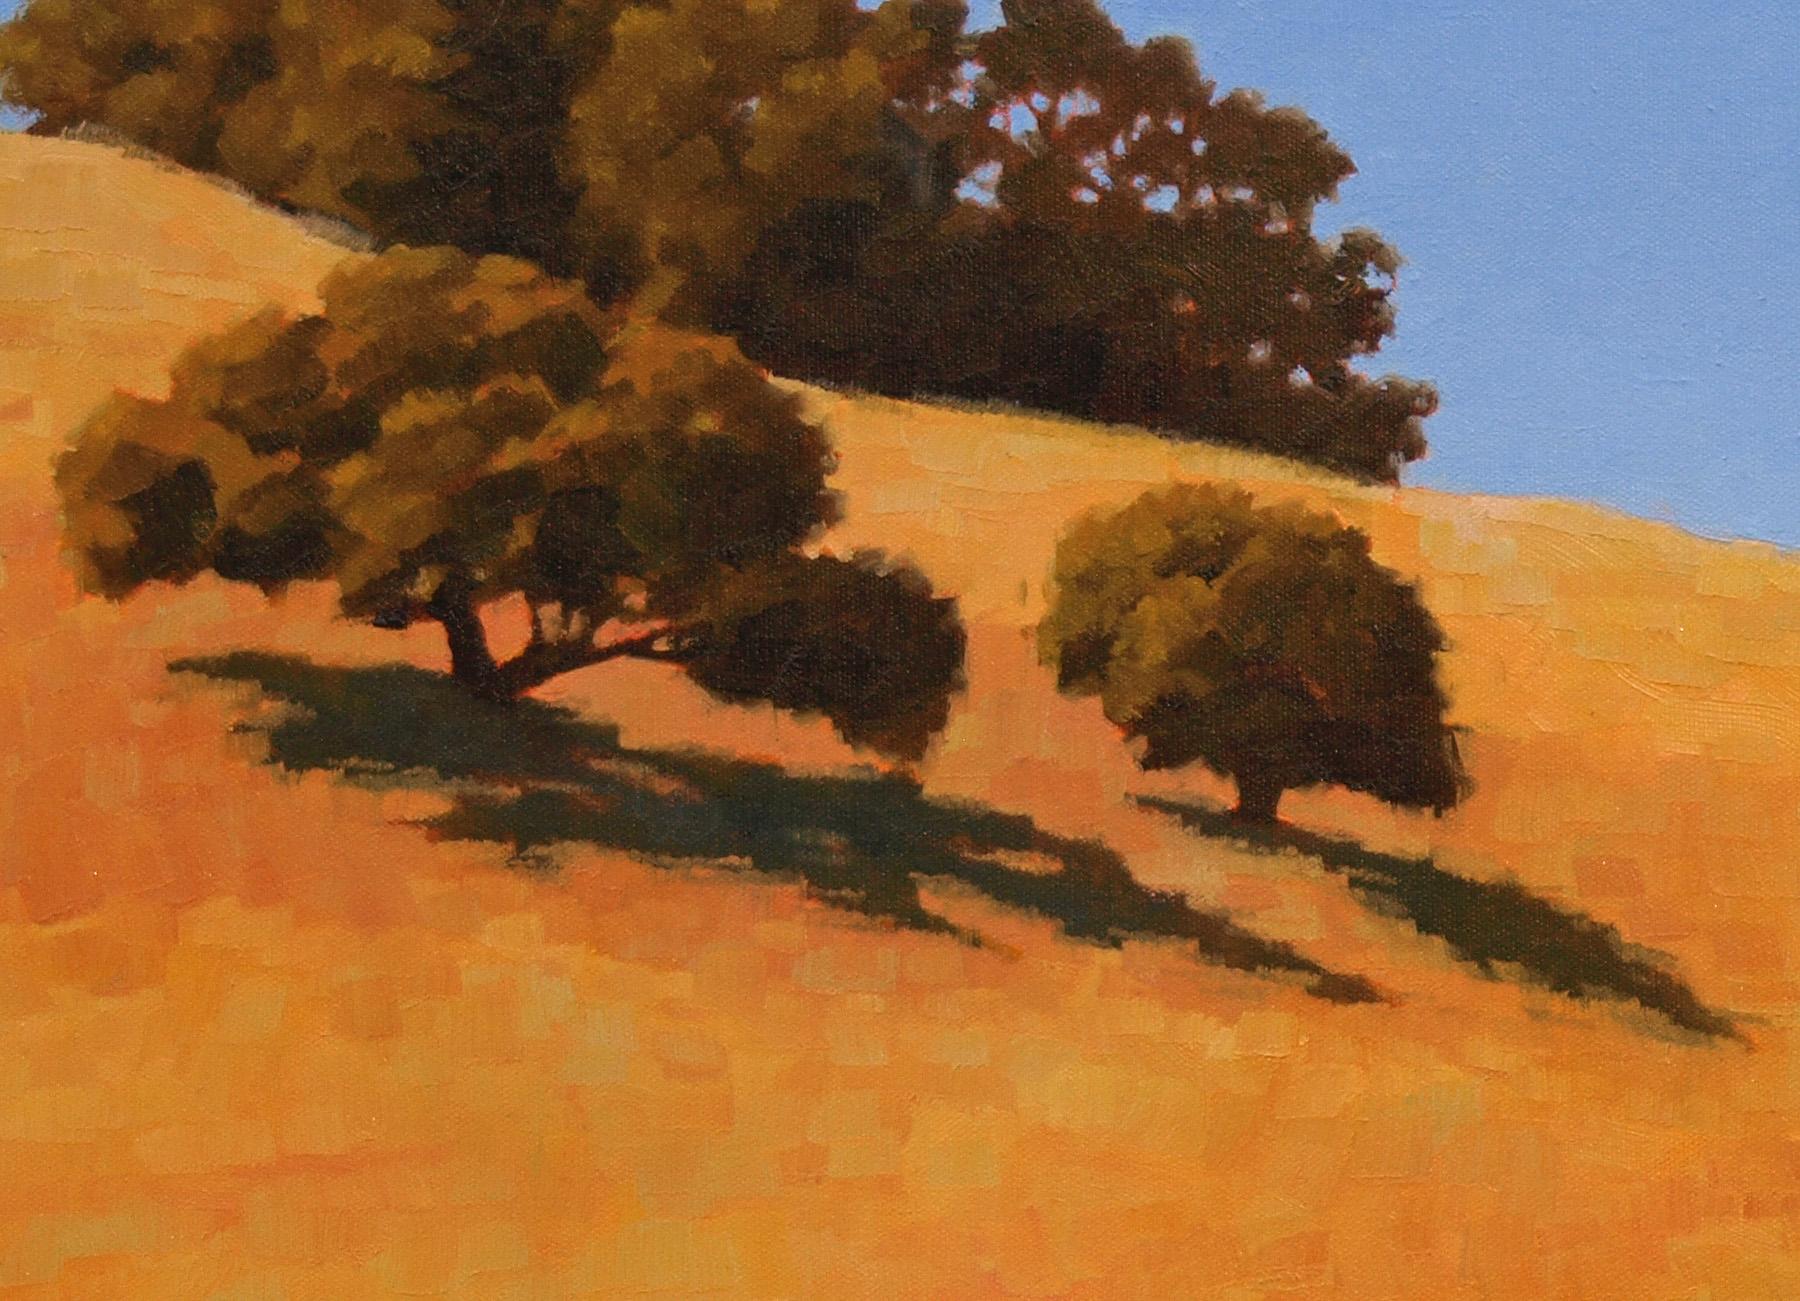 Oaks 1, Oil Painting - Abstract Impressionist Art by Rodgers Naylor